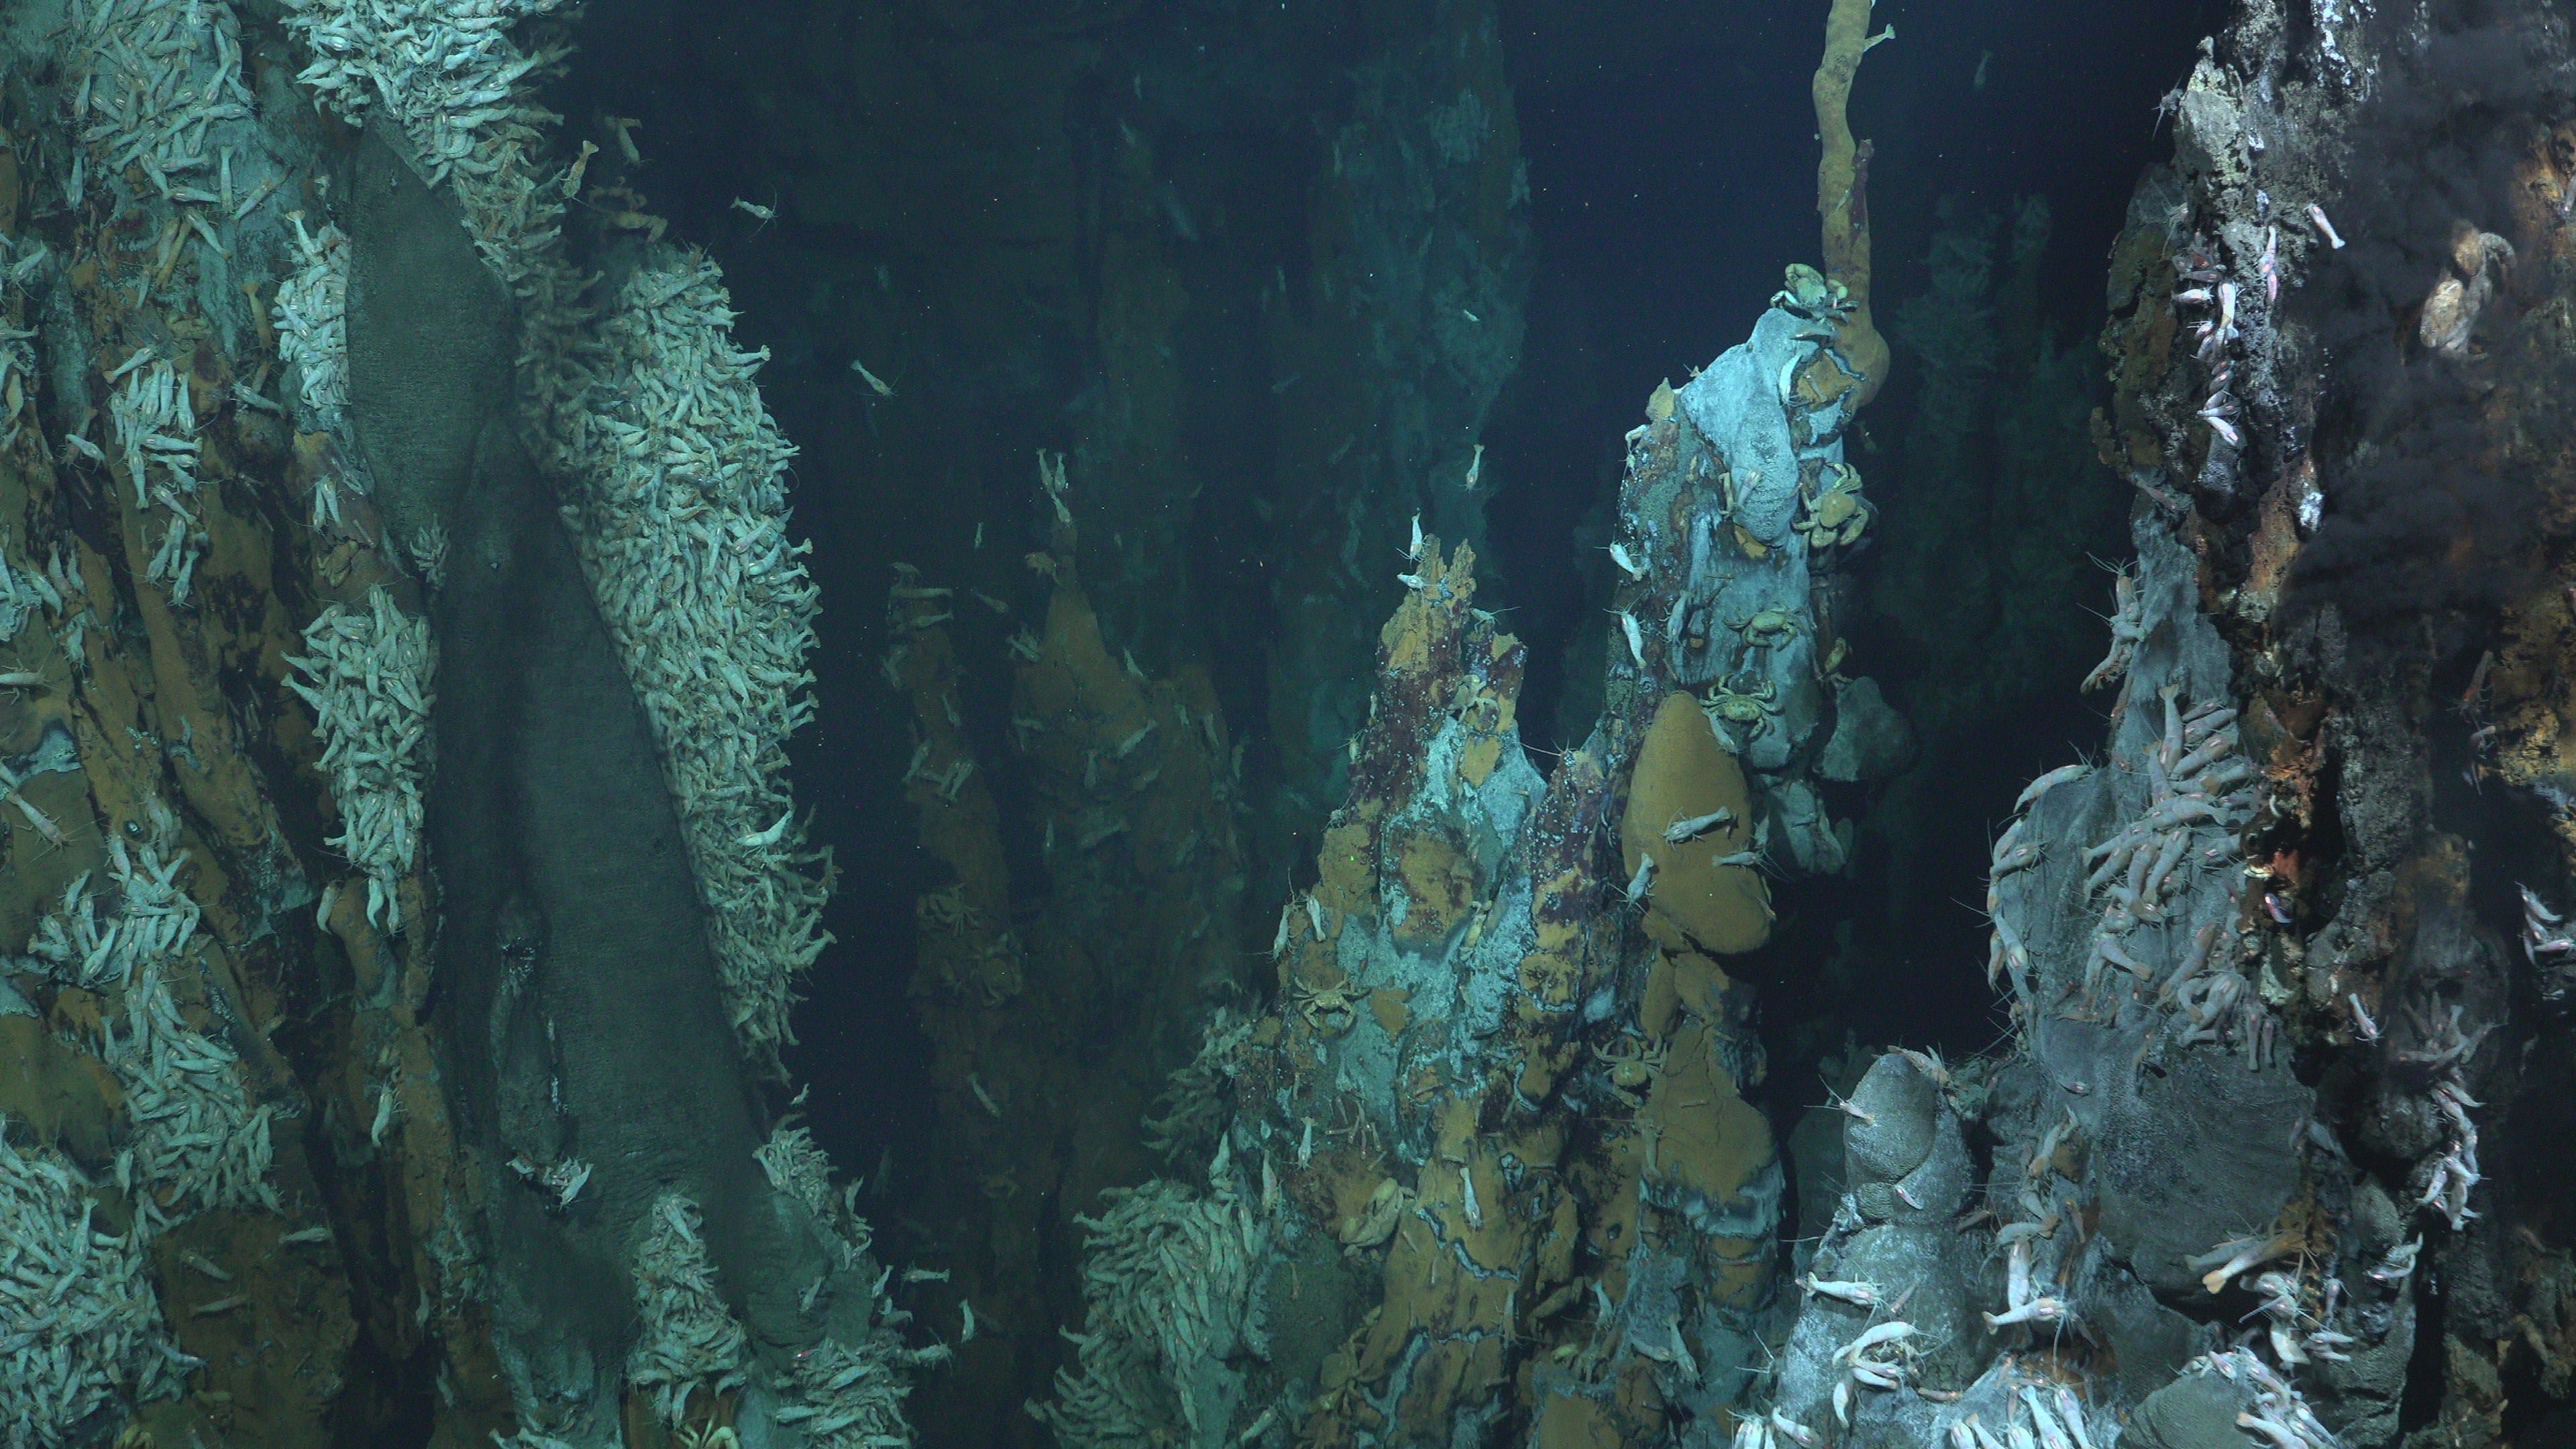 Water is expelled at the vents through large stacks called chimneys; the tallest of these chimneys the researchers observed was more than 65 feet (20 meters) high. (Photo: ROV SuBastian / Schmidt Ocean Institute)